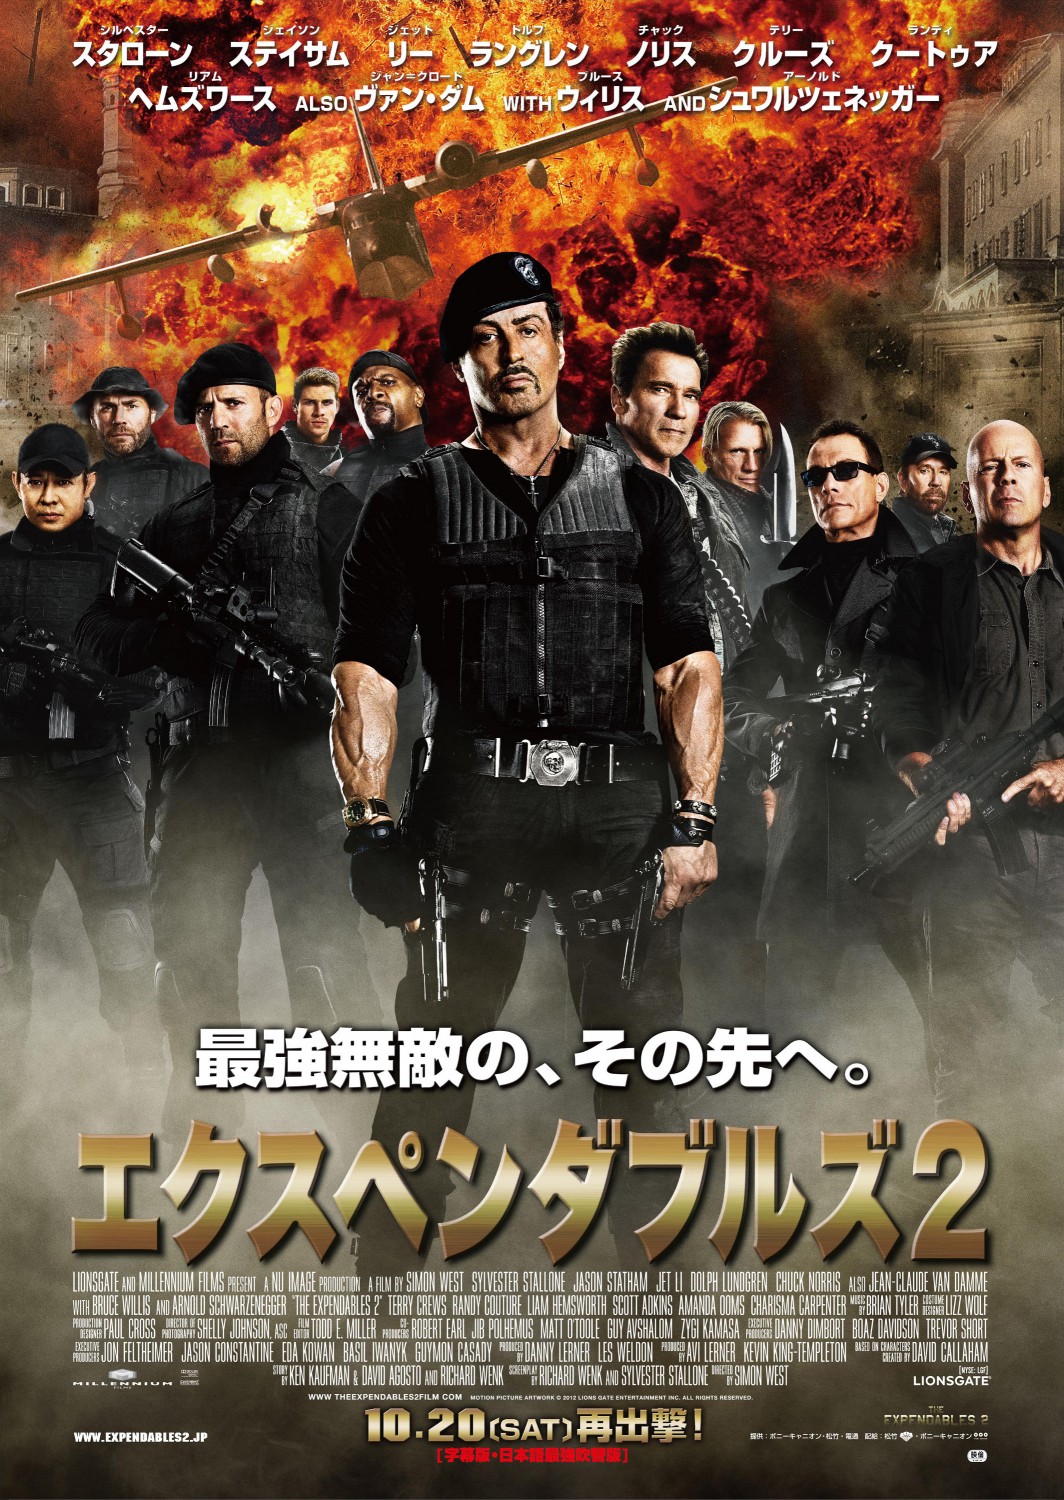 Extra Large Movie Poster Image for The Expendables 2 (#20 of 21)